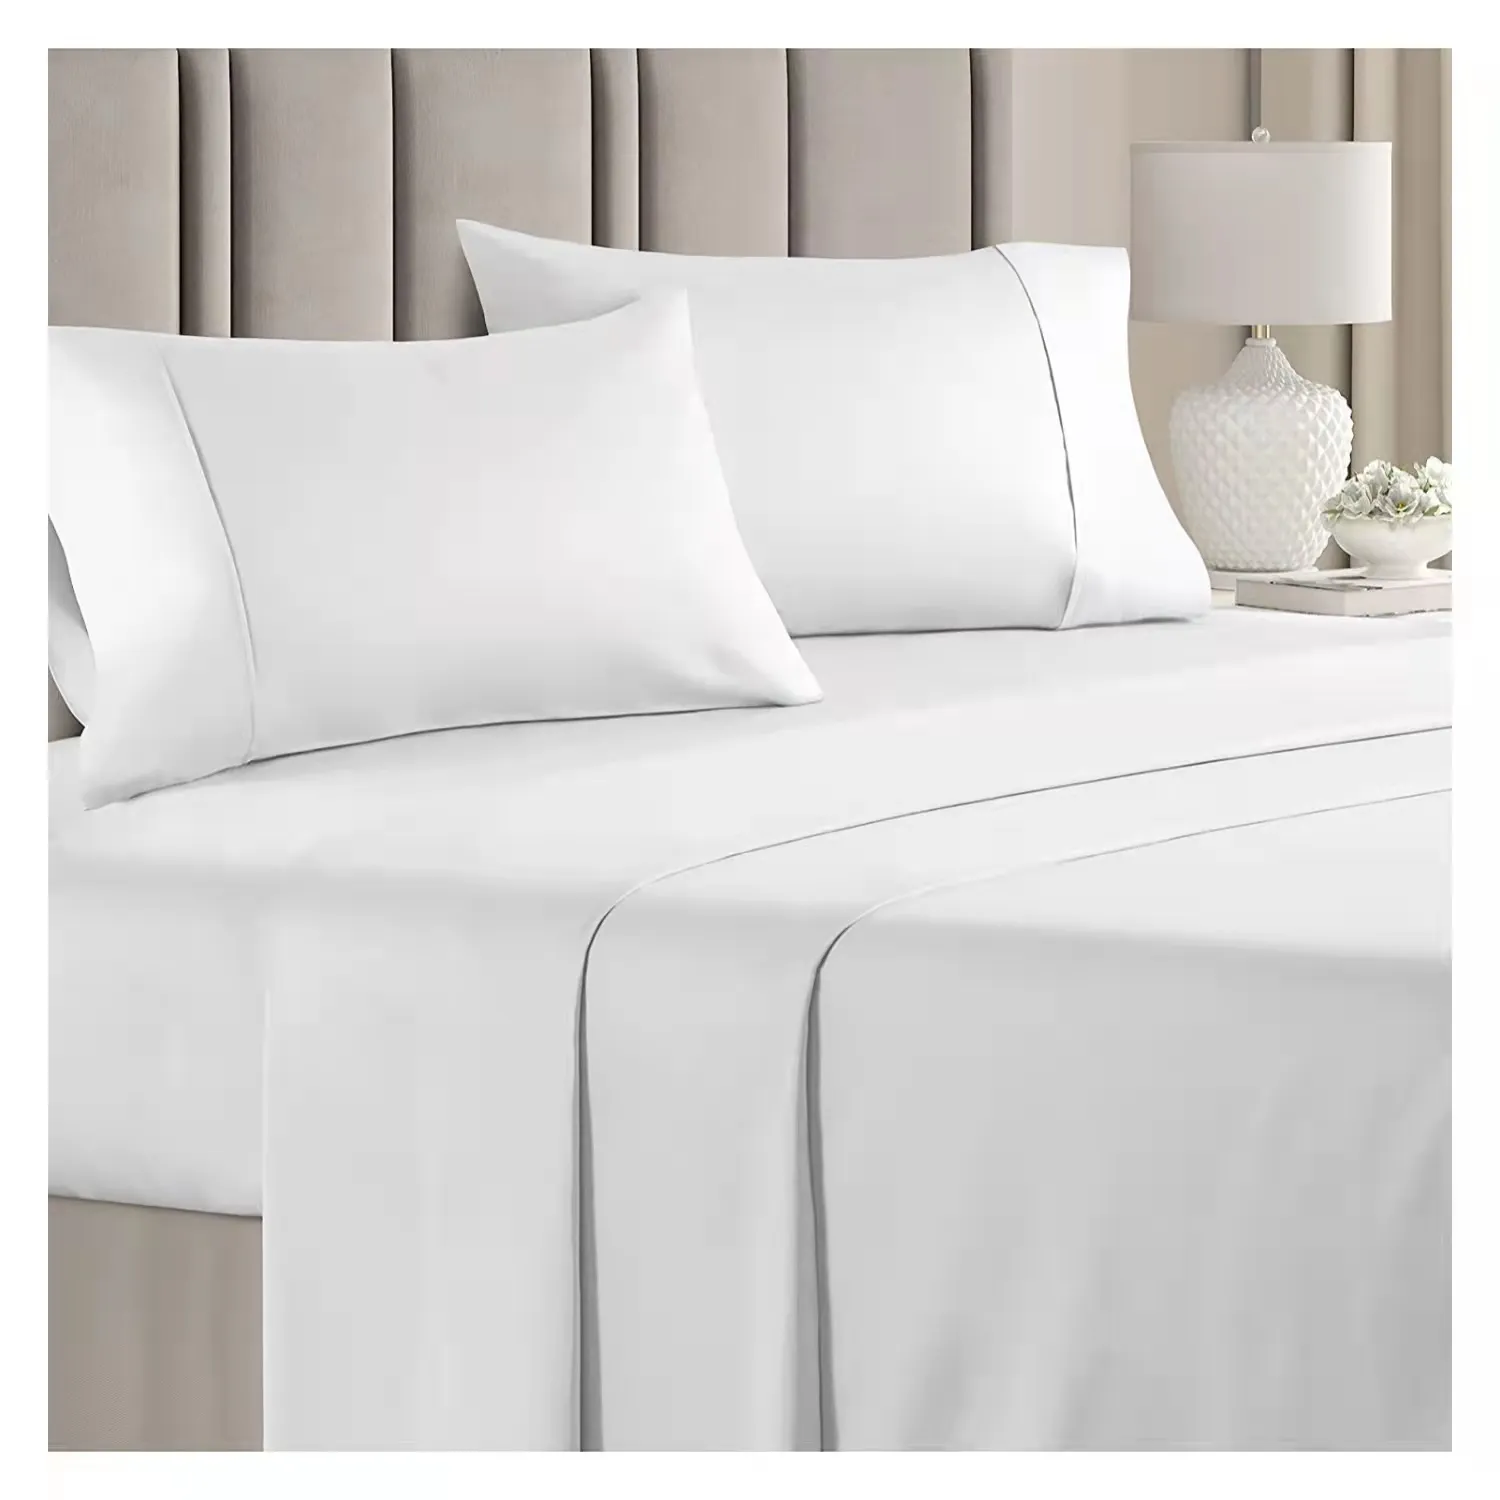 High Quality Pure Cotton Queen Size Sheets Set Home Bedding Sets Sateen 600TC Egyptian Cotton Bed Sheets Set for Hotel